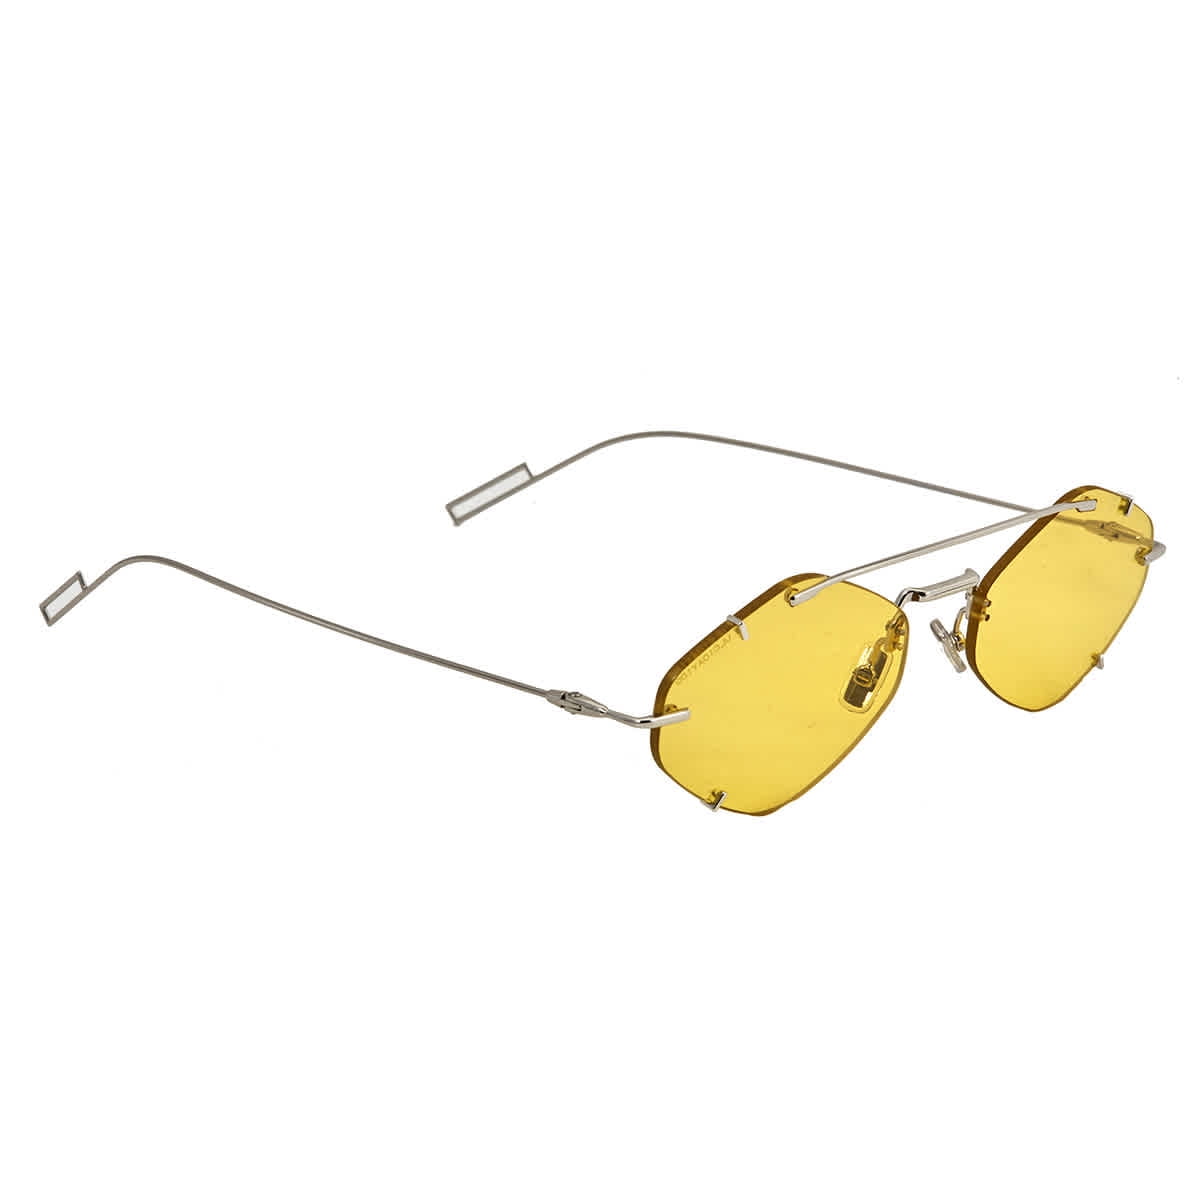 NEW DIOR SUNGLASSES DIORABSTRACTYHO NEUTRAL POLYCARBONATE YELLOW